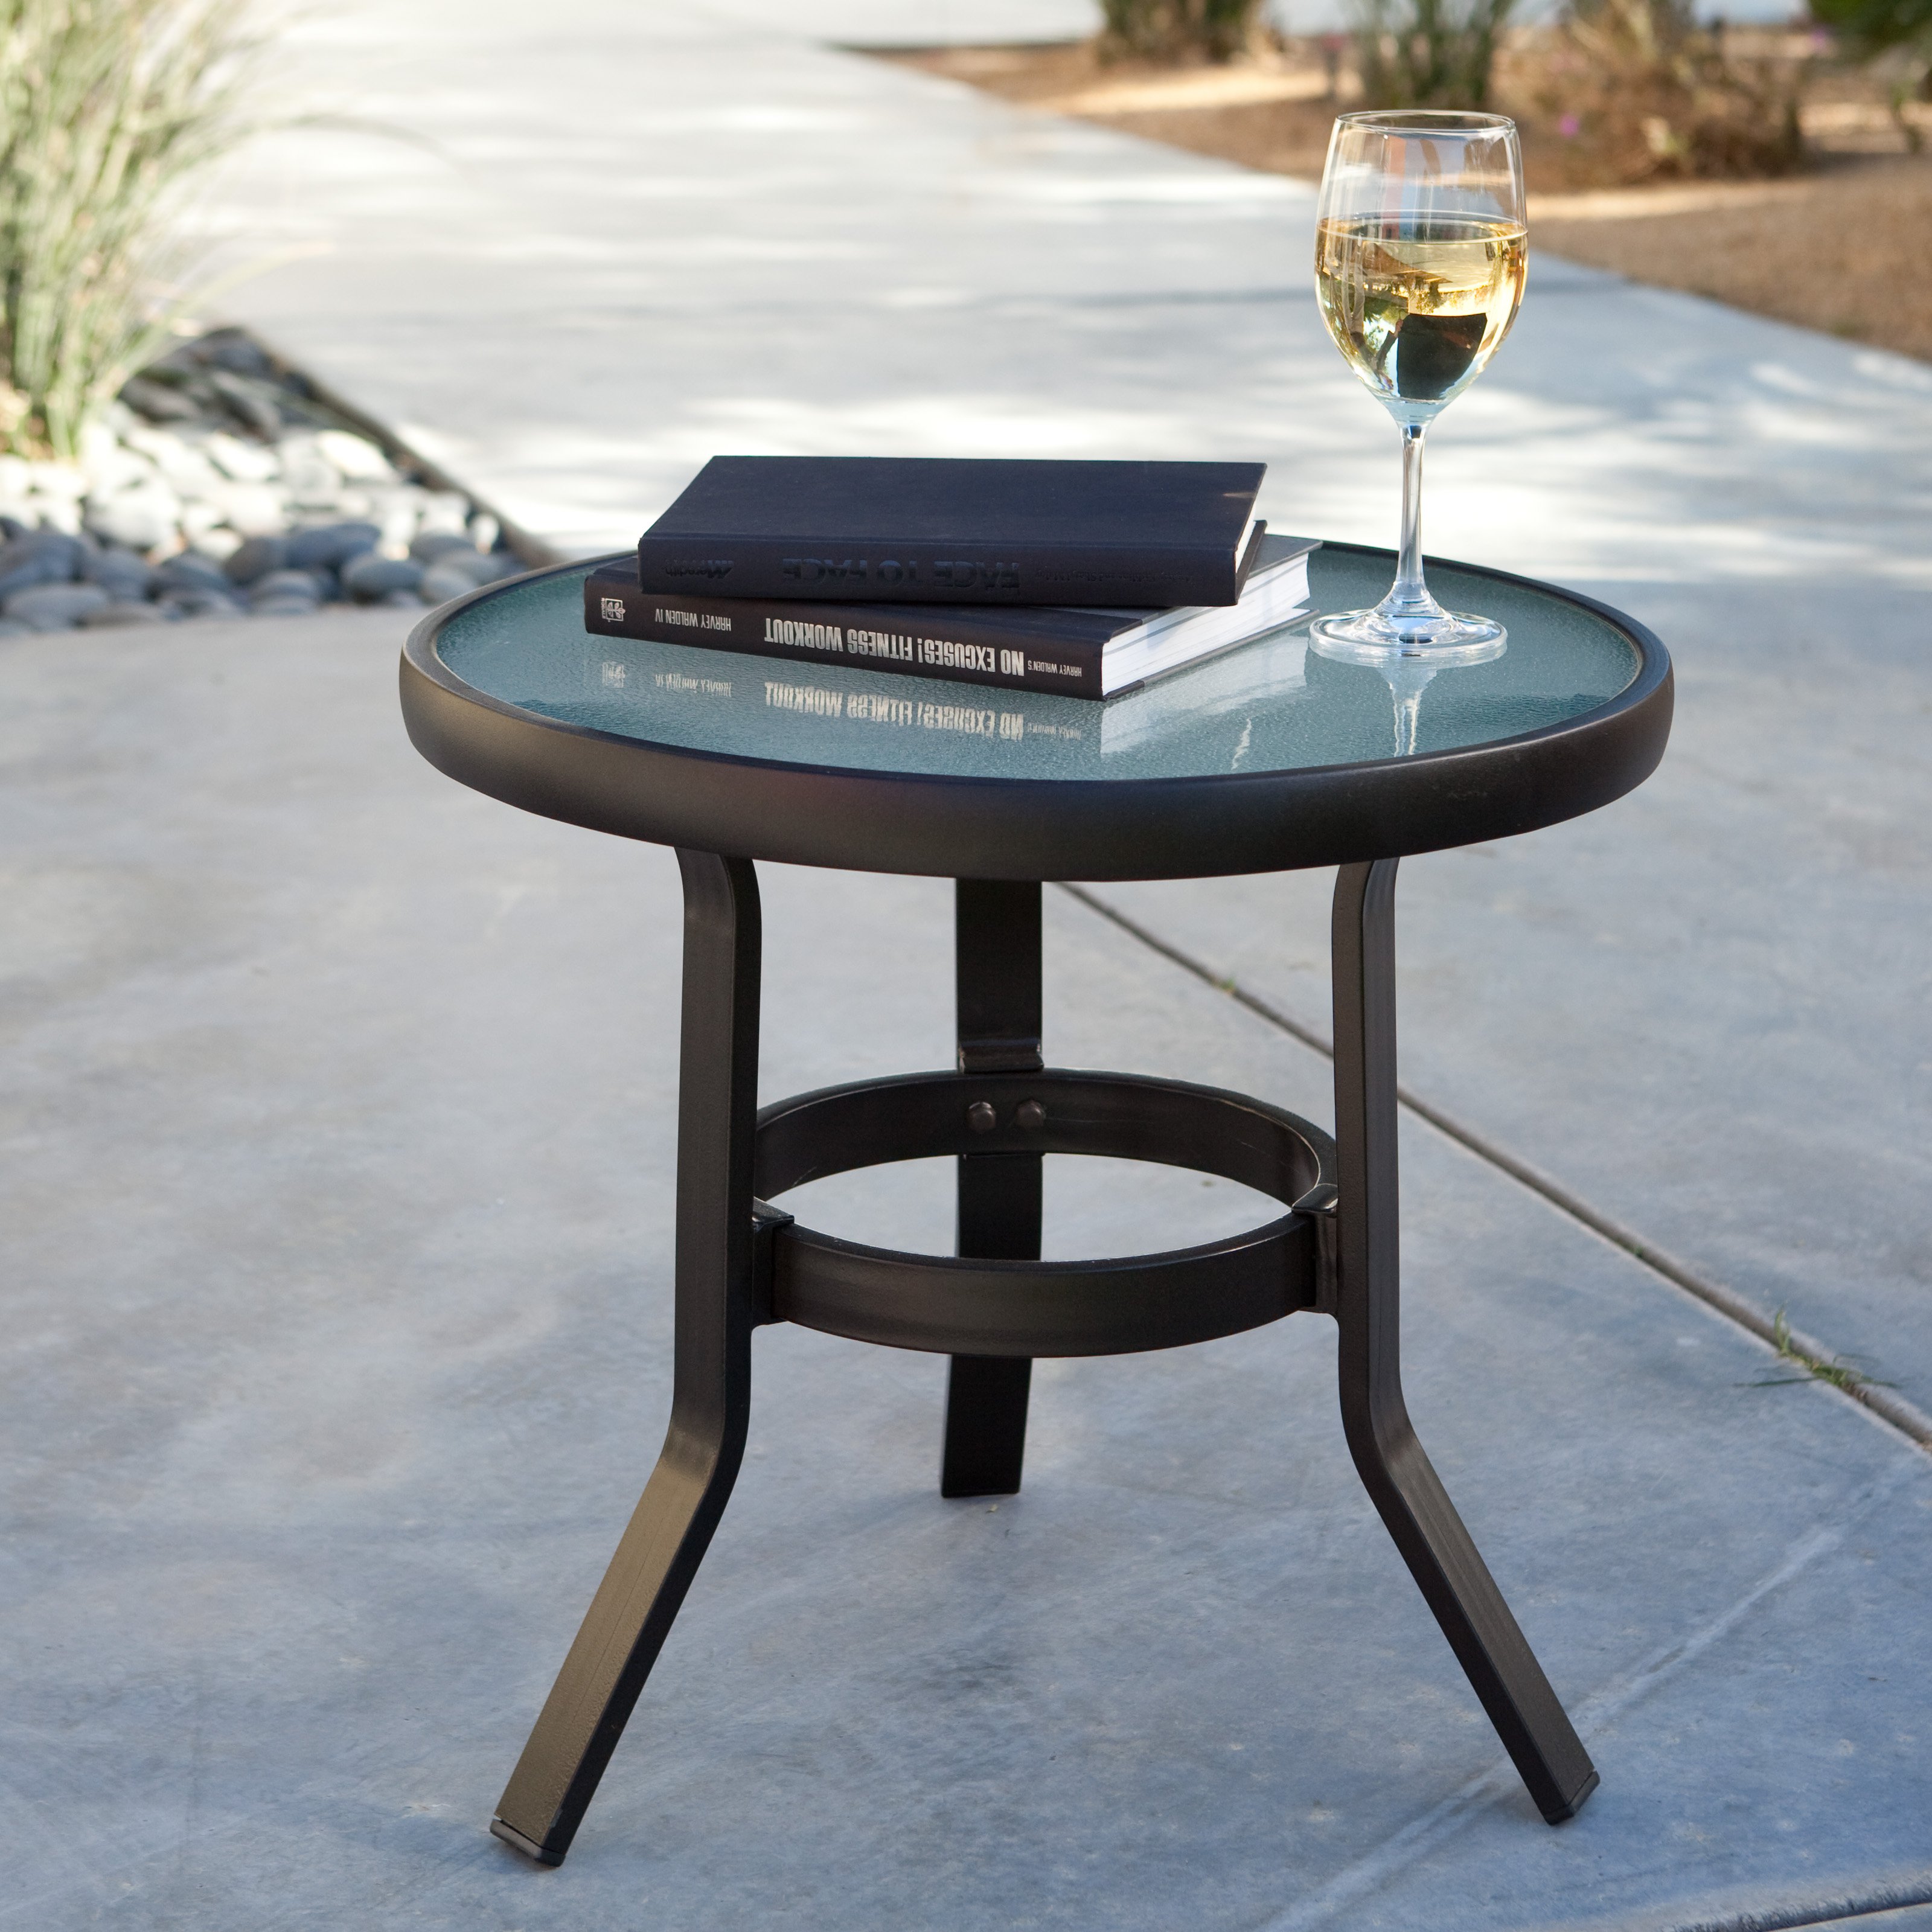 coral coast patio side table accent tables unfinished trestle target outdoor small glass top ikea couch covers room essentials chairs chair square bar height dining bunnings and